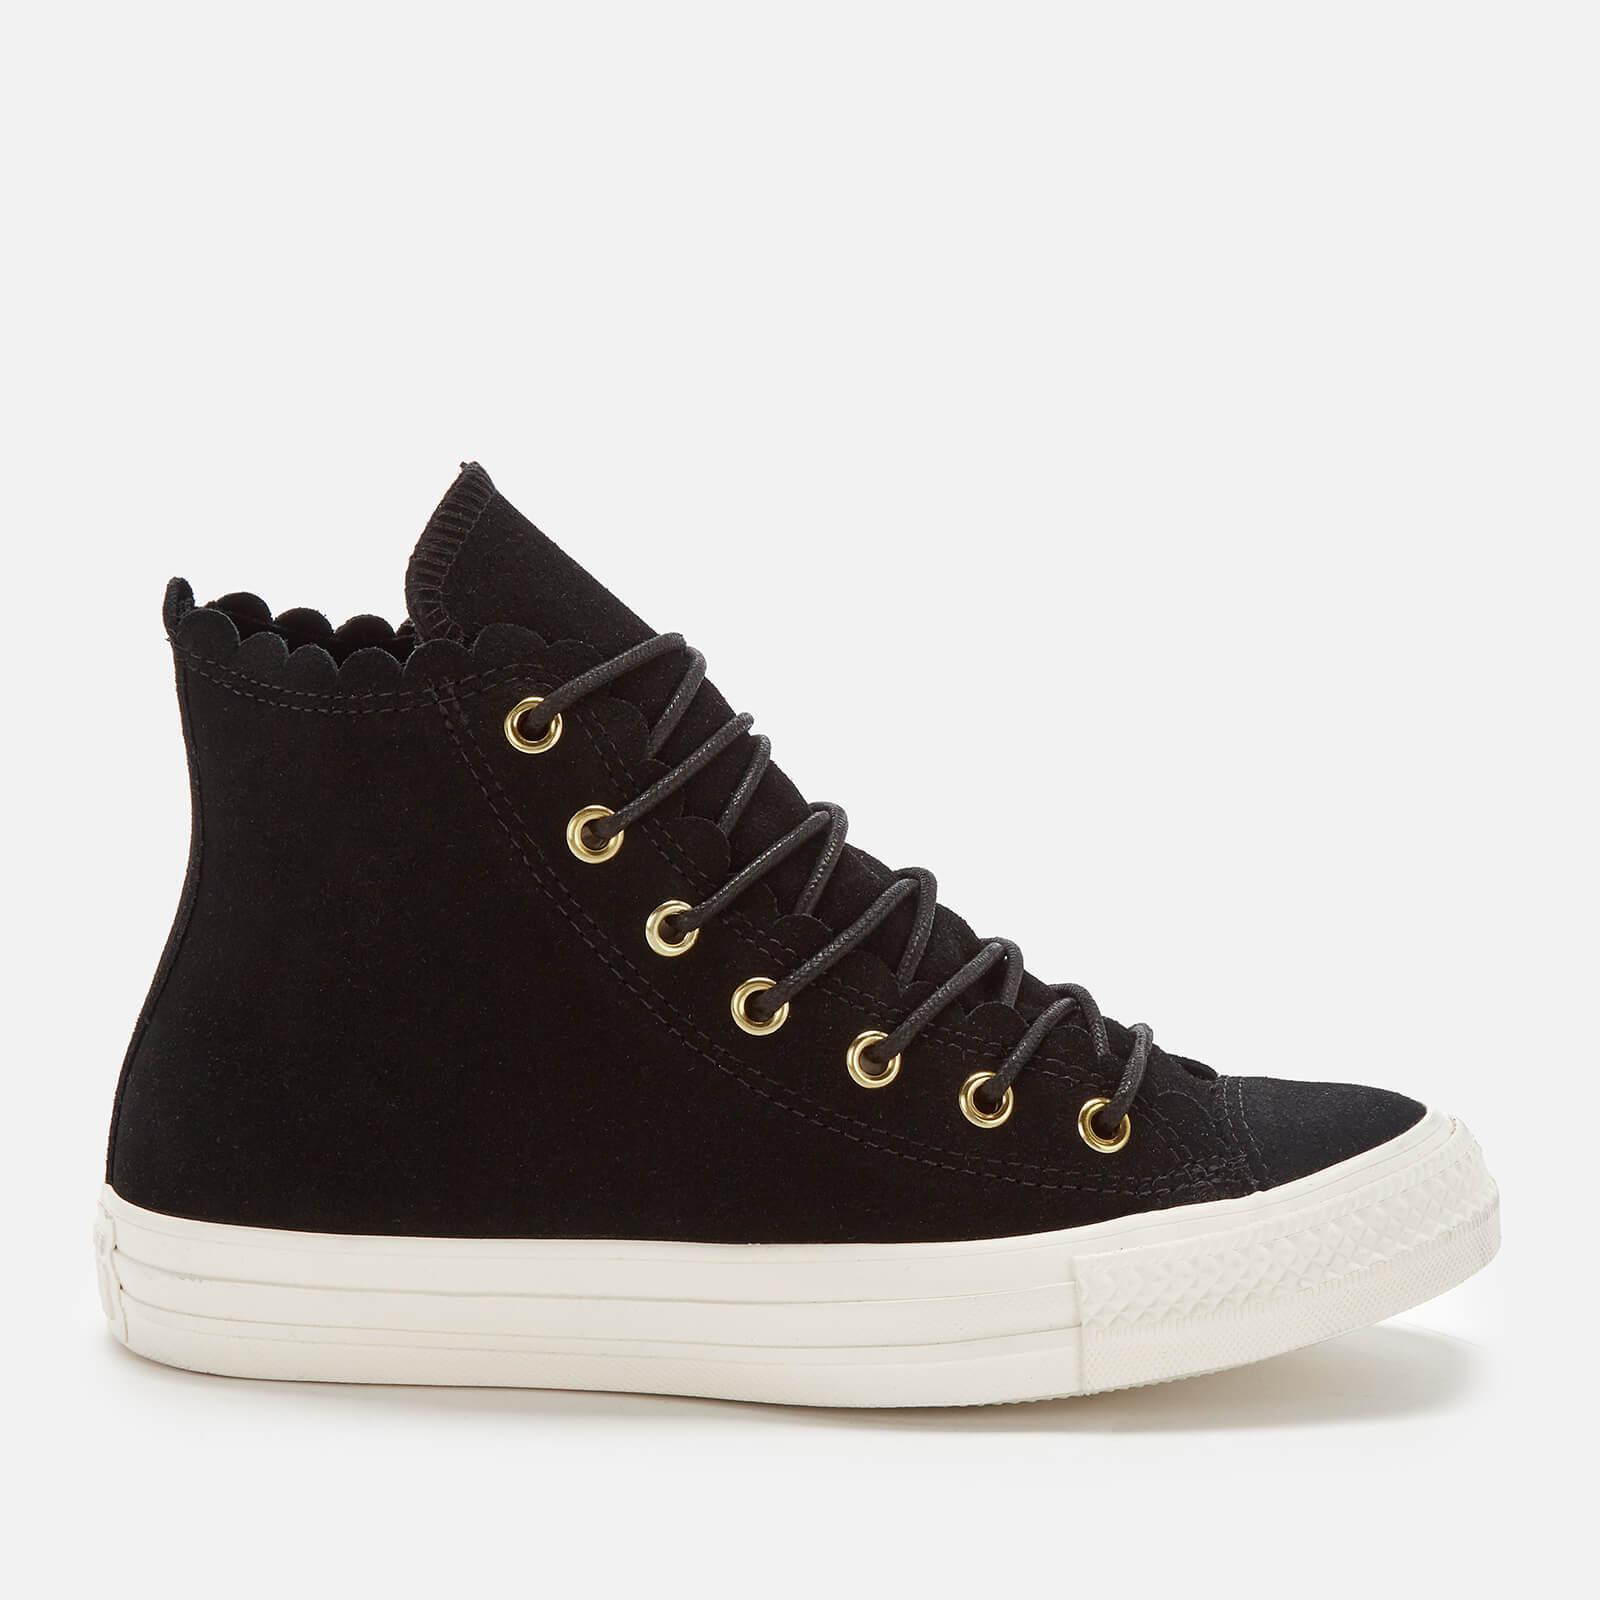 Converse Chuck Taylor All Star Scalloped Edge Hi-top Trainers in Black |  Lyst